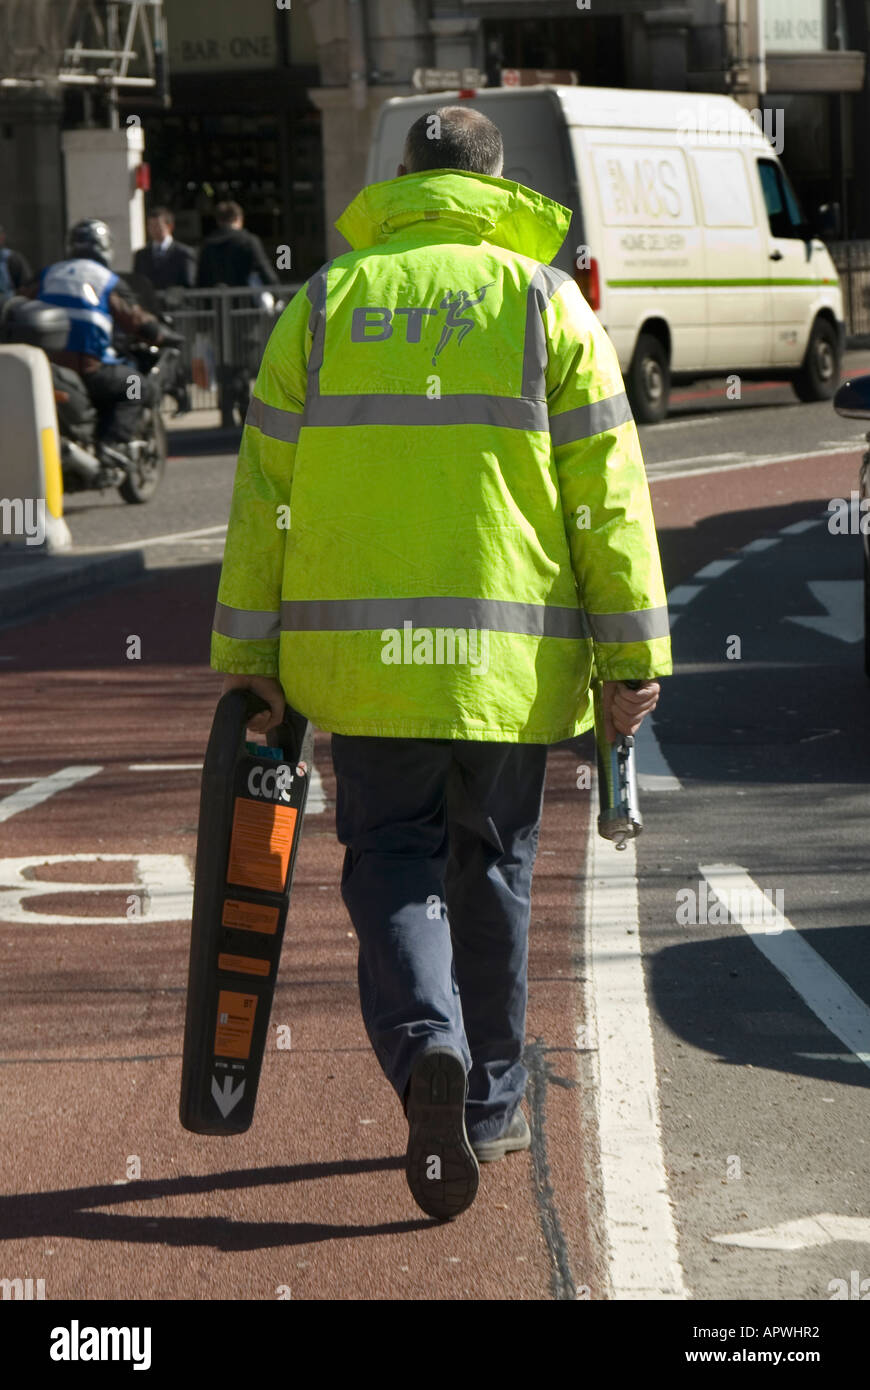 British Telecom technician BT high viz vis jacket at work walking in road holding scanning device helps to detect underground service cables London UK Stock Photo